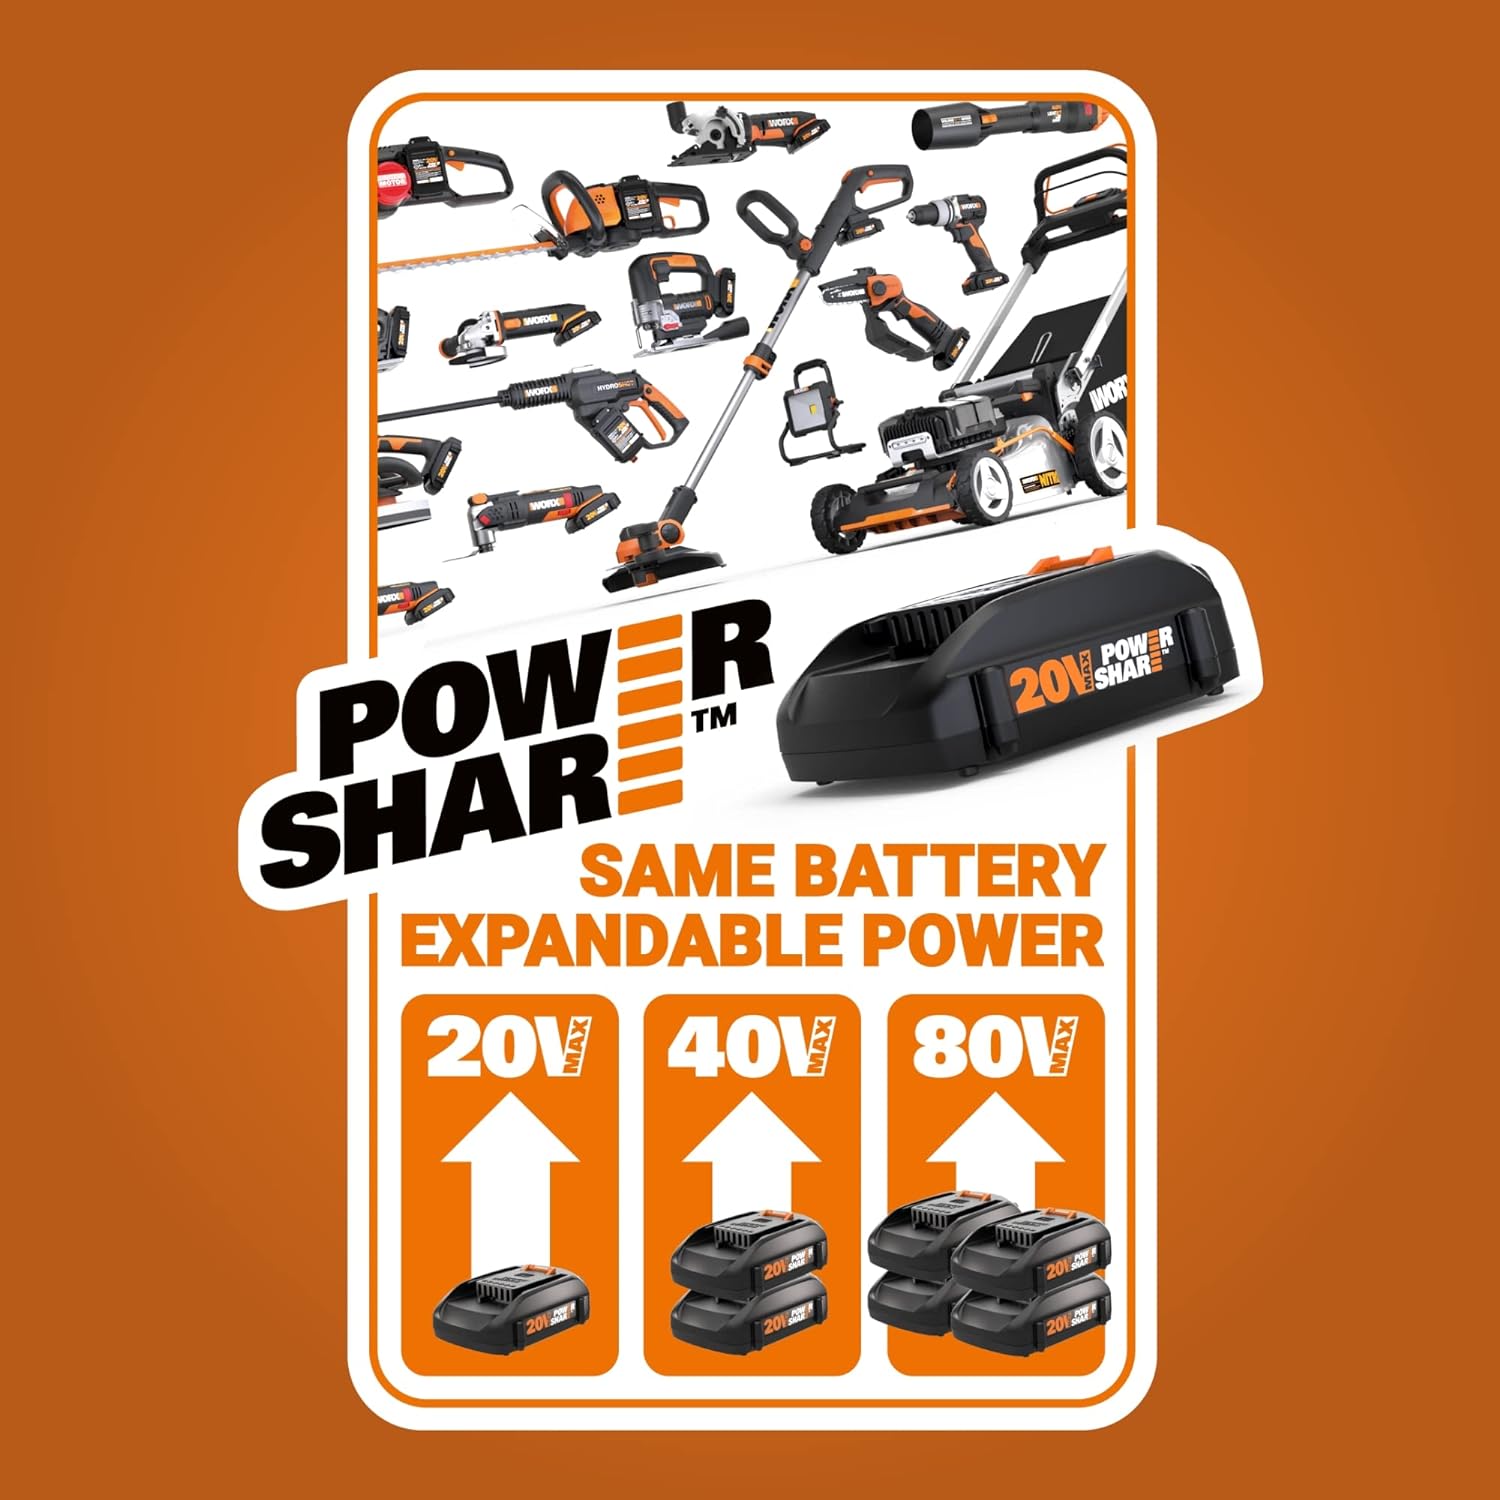 https://bigbigmart.com/wp-content/uploads/2023/10/Worx-40V-Turbine-Leaf-Blower-Cordless-with-Battery-and-Charger-Brushless-Motor-Blowers-for-Lawn-Care-Compact-and-Lightweight-Cordless-Leaf-Blower-WG584-%E2%80%93-2-Batteries-Charger-Included34.jpg